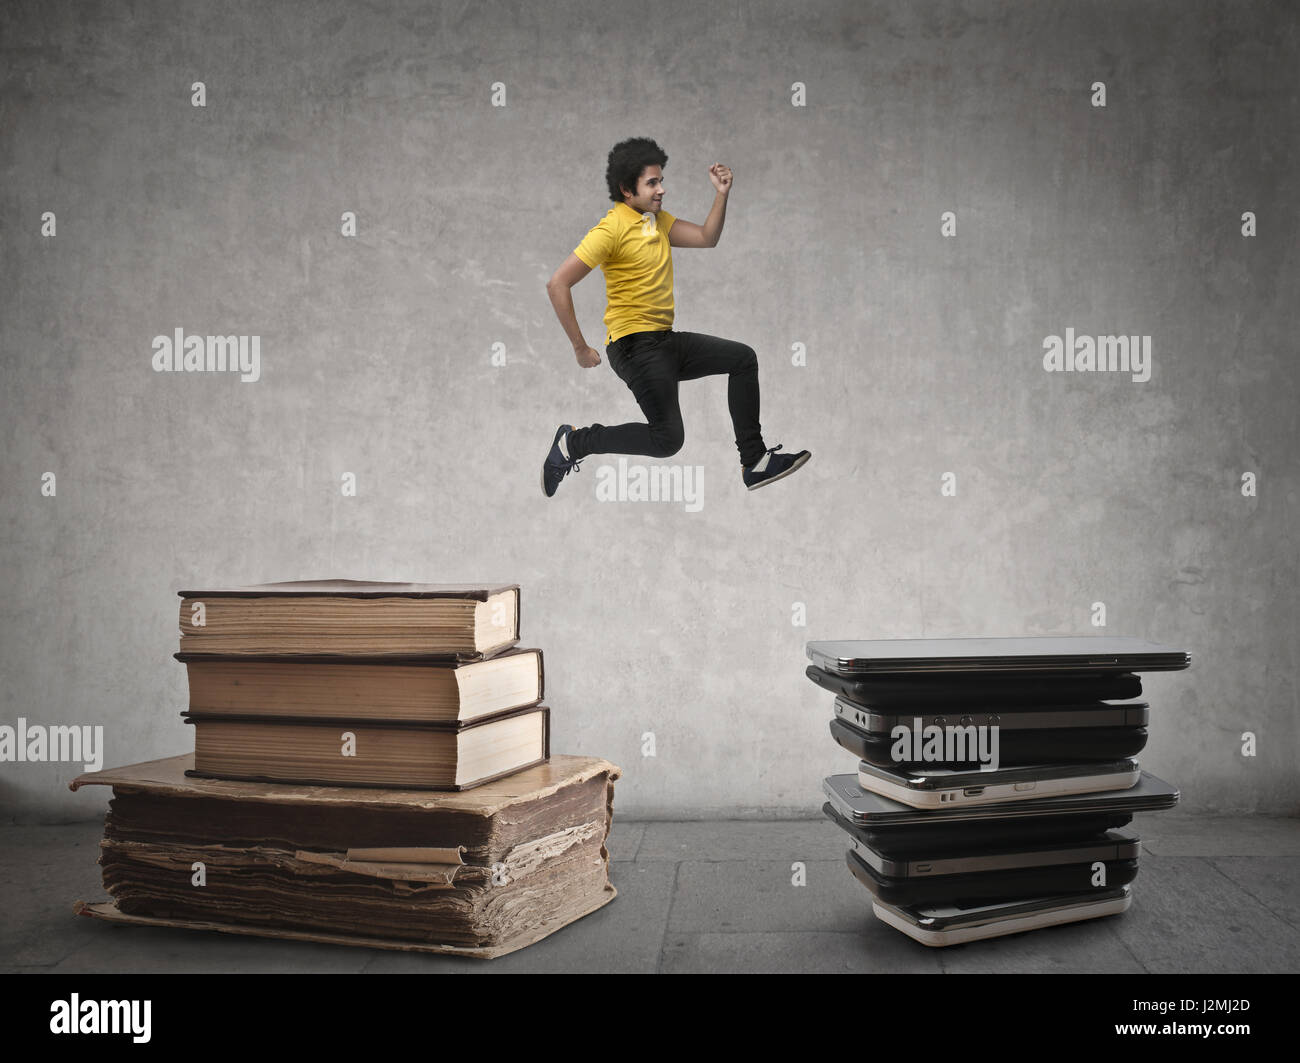 Man jumping from books to CDs Stock Photo